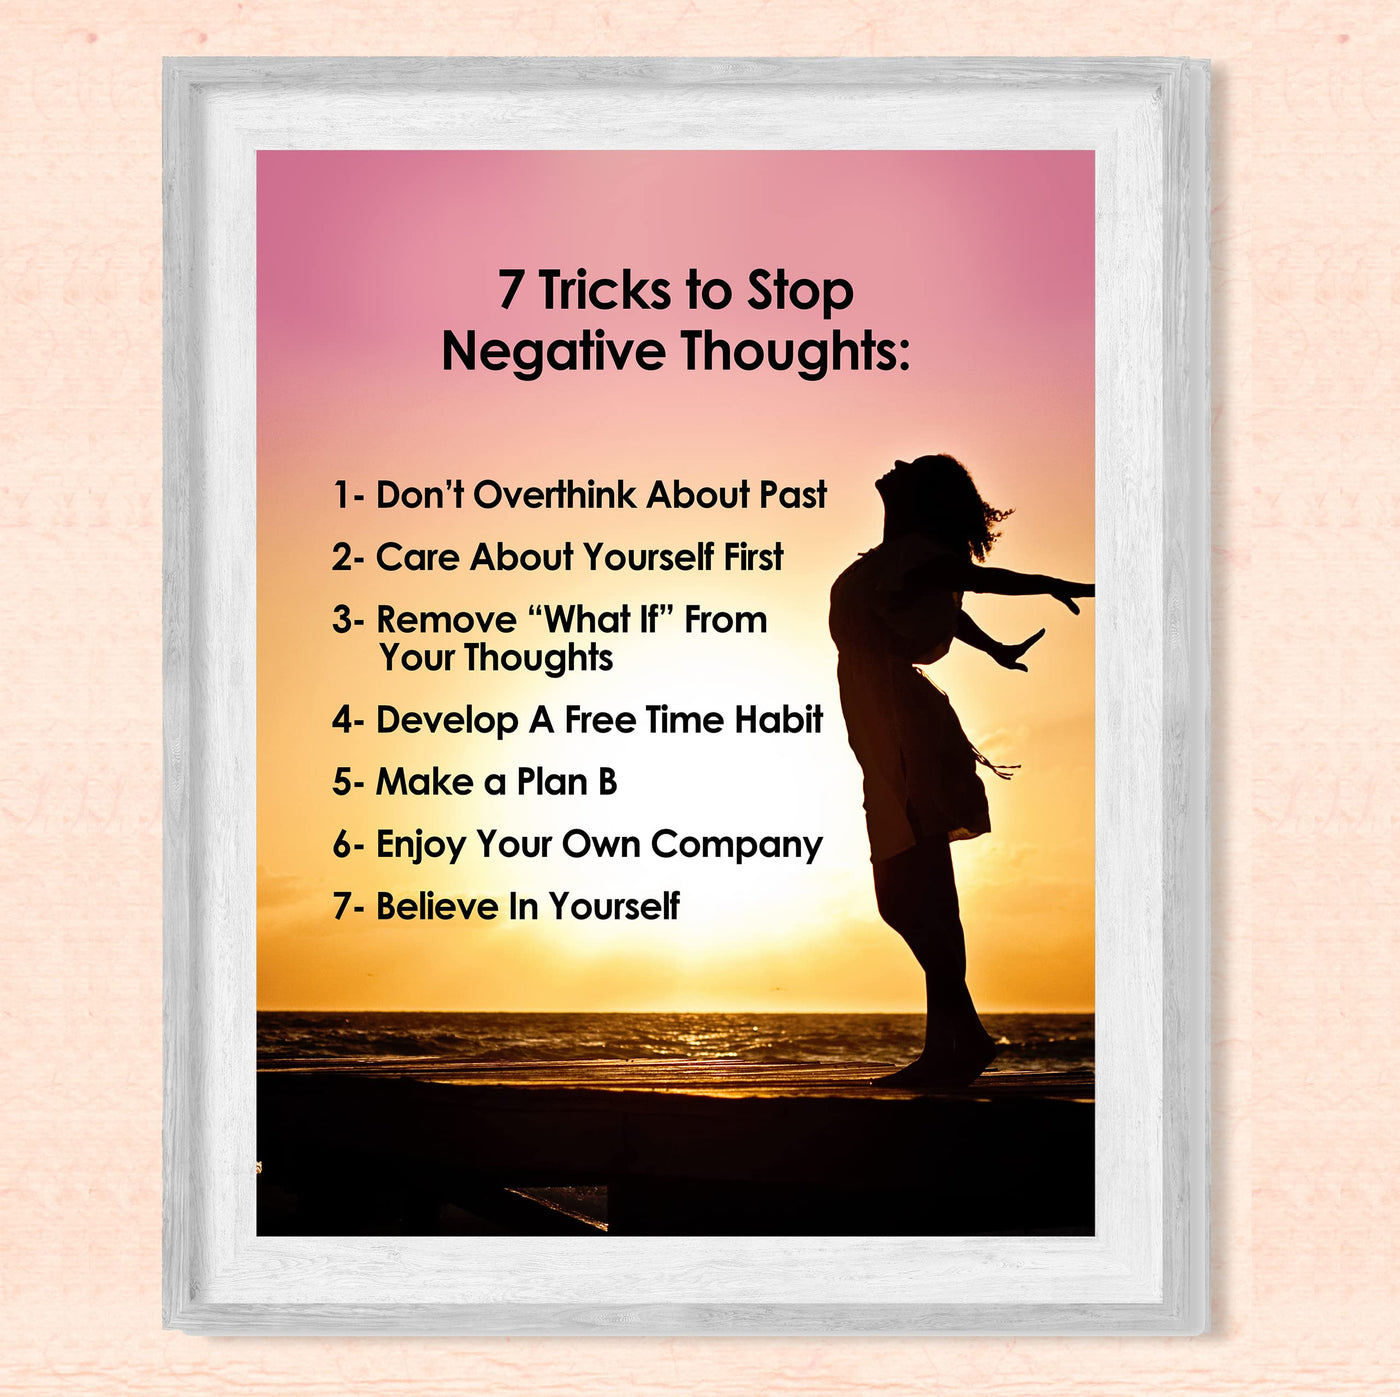 7 Tricks to Stop Negative Thoughts Motivational Quotes Wall Art -8x10" Beach Sunset Picture Print -Ready to Frame. Inspirational Home-Office-School-Teens Decor. Positive Gift for Motivation!